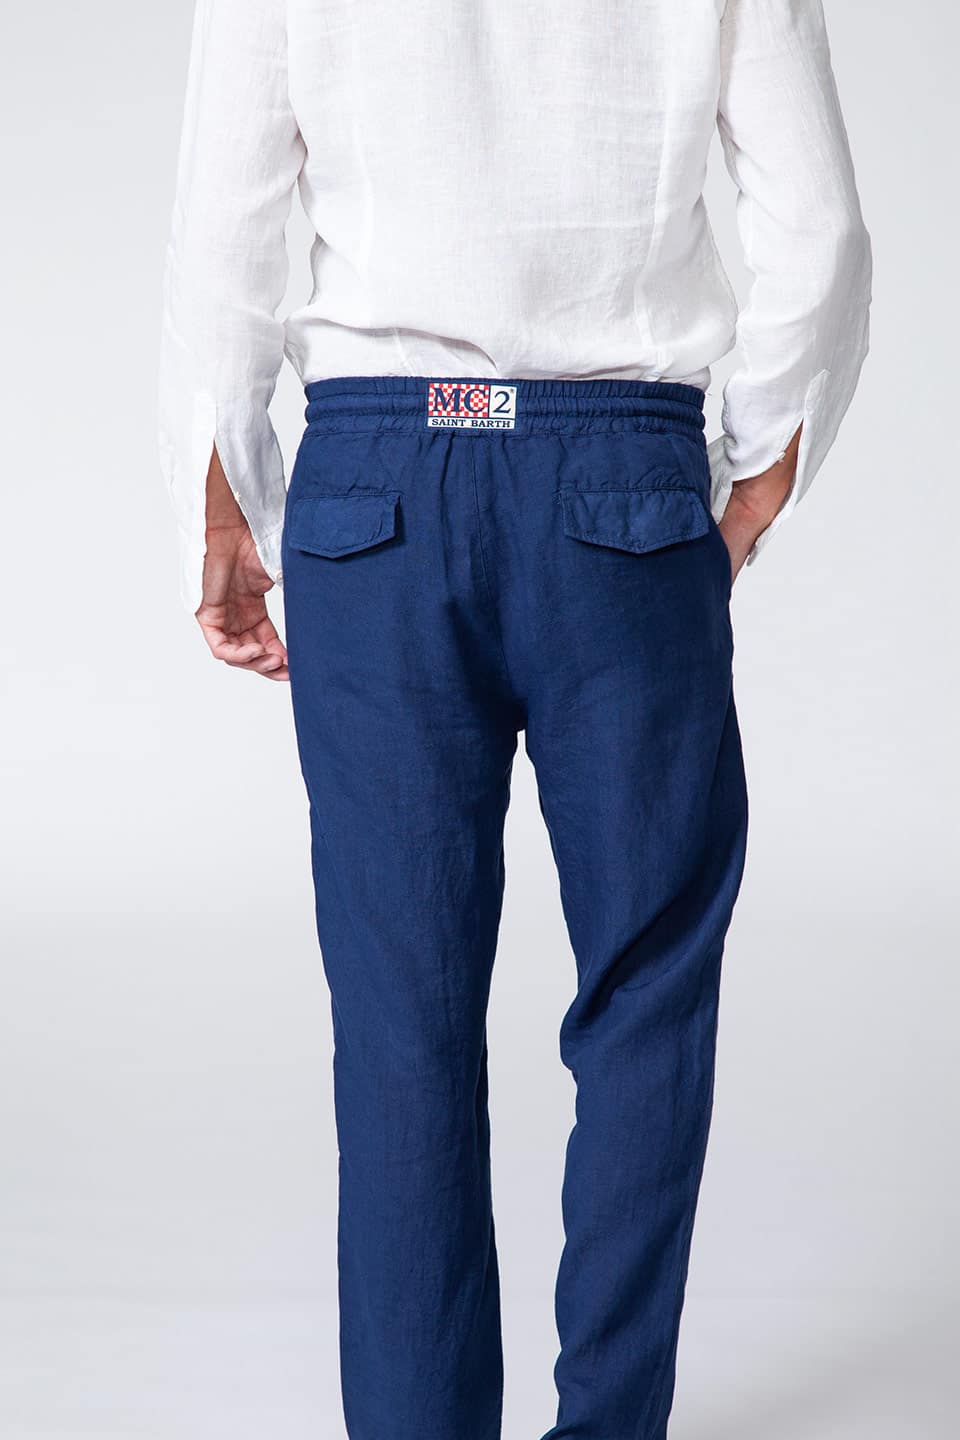 Thumbnail for Product gallery 2, Italian brand man linen trousers from MC2 Saint Barth in blue color. back product view